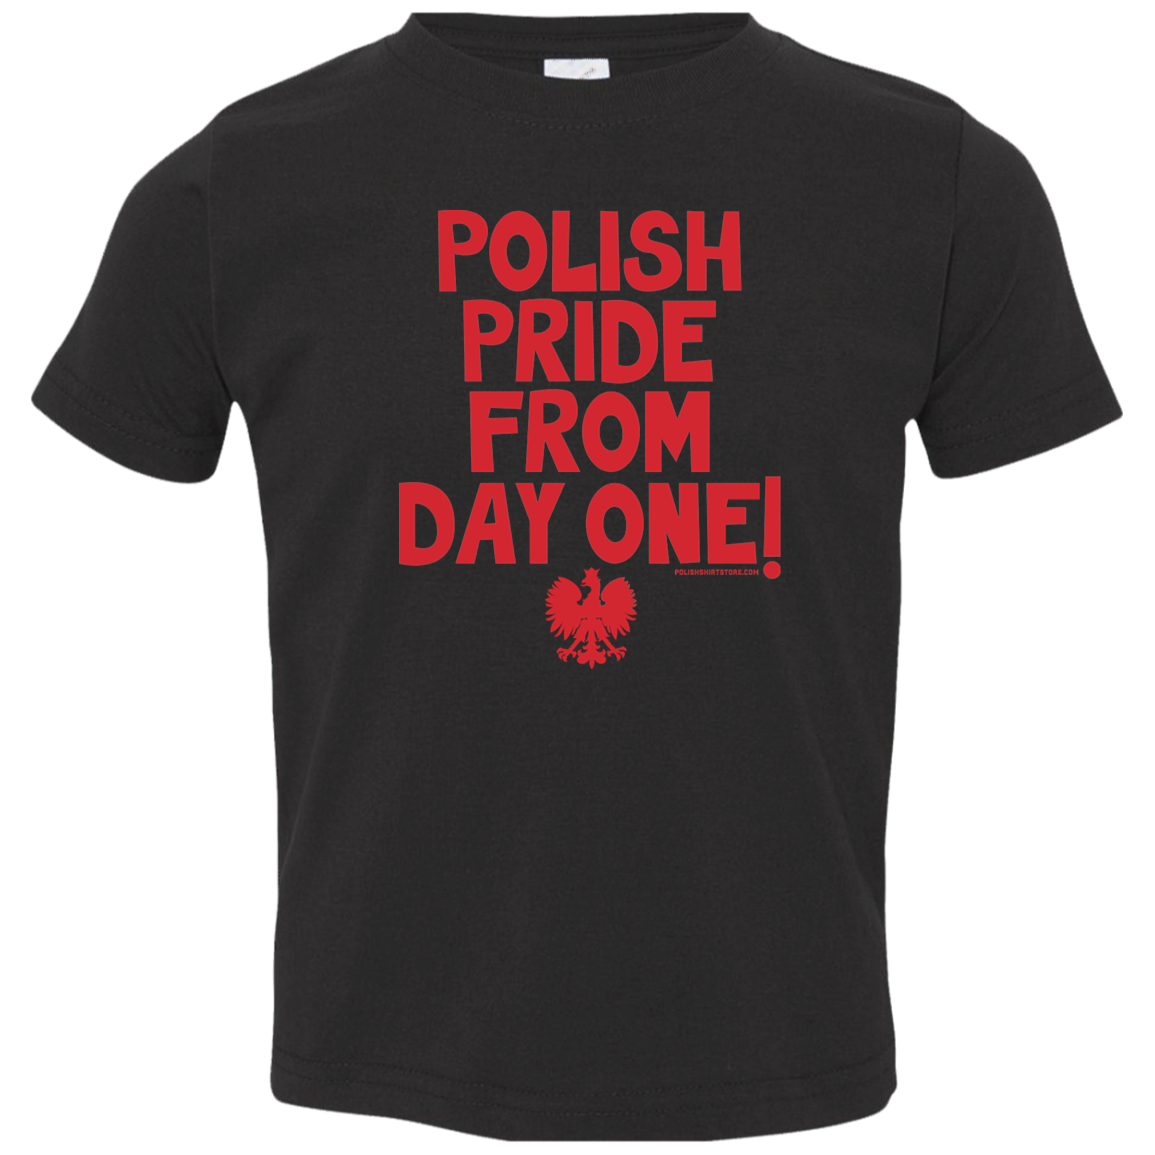 Polish Pride From Day One Infant & Toddler T-Shirt Apparel CustomCat Toddler T-Shirt Black 2T